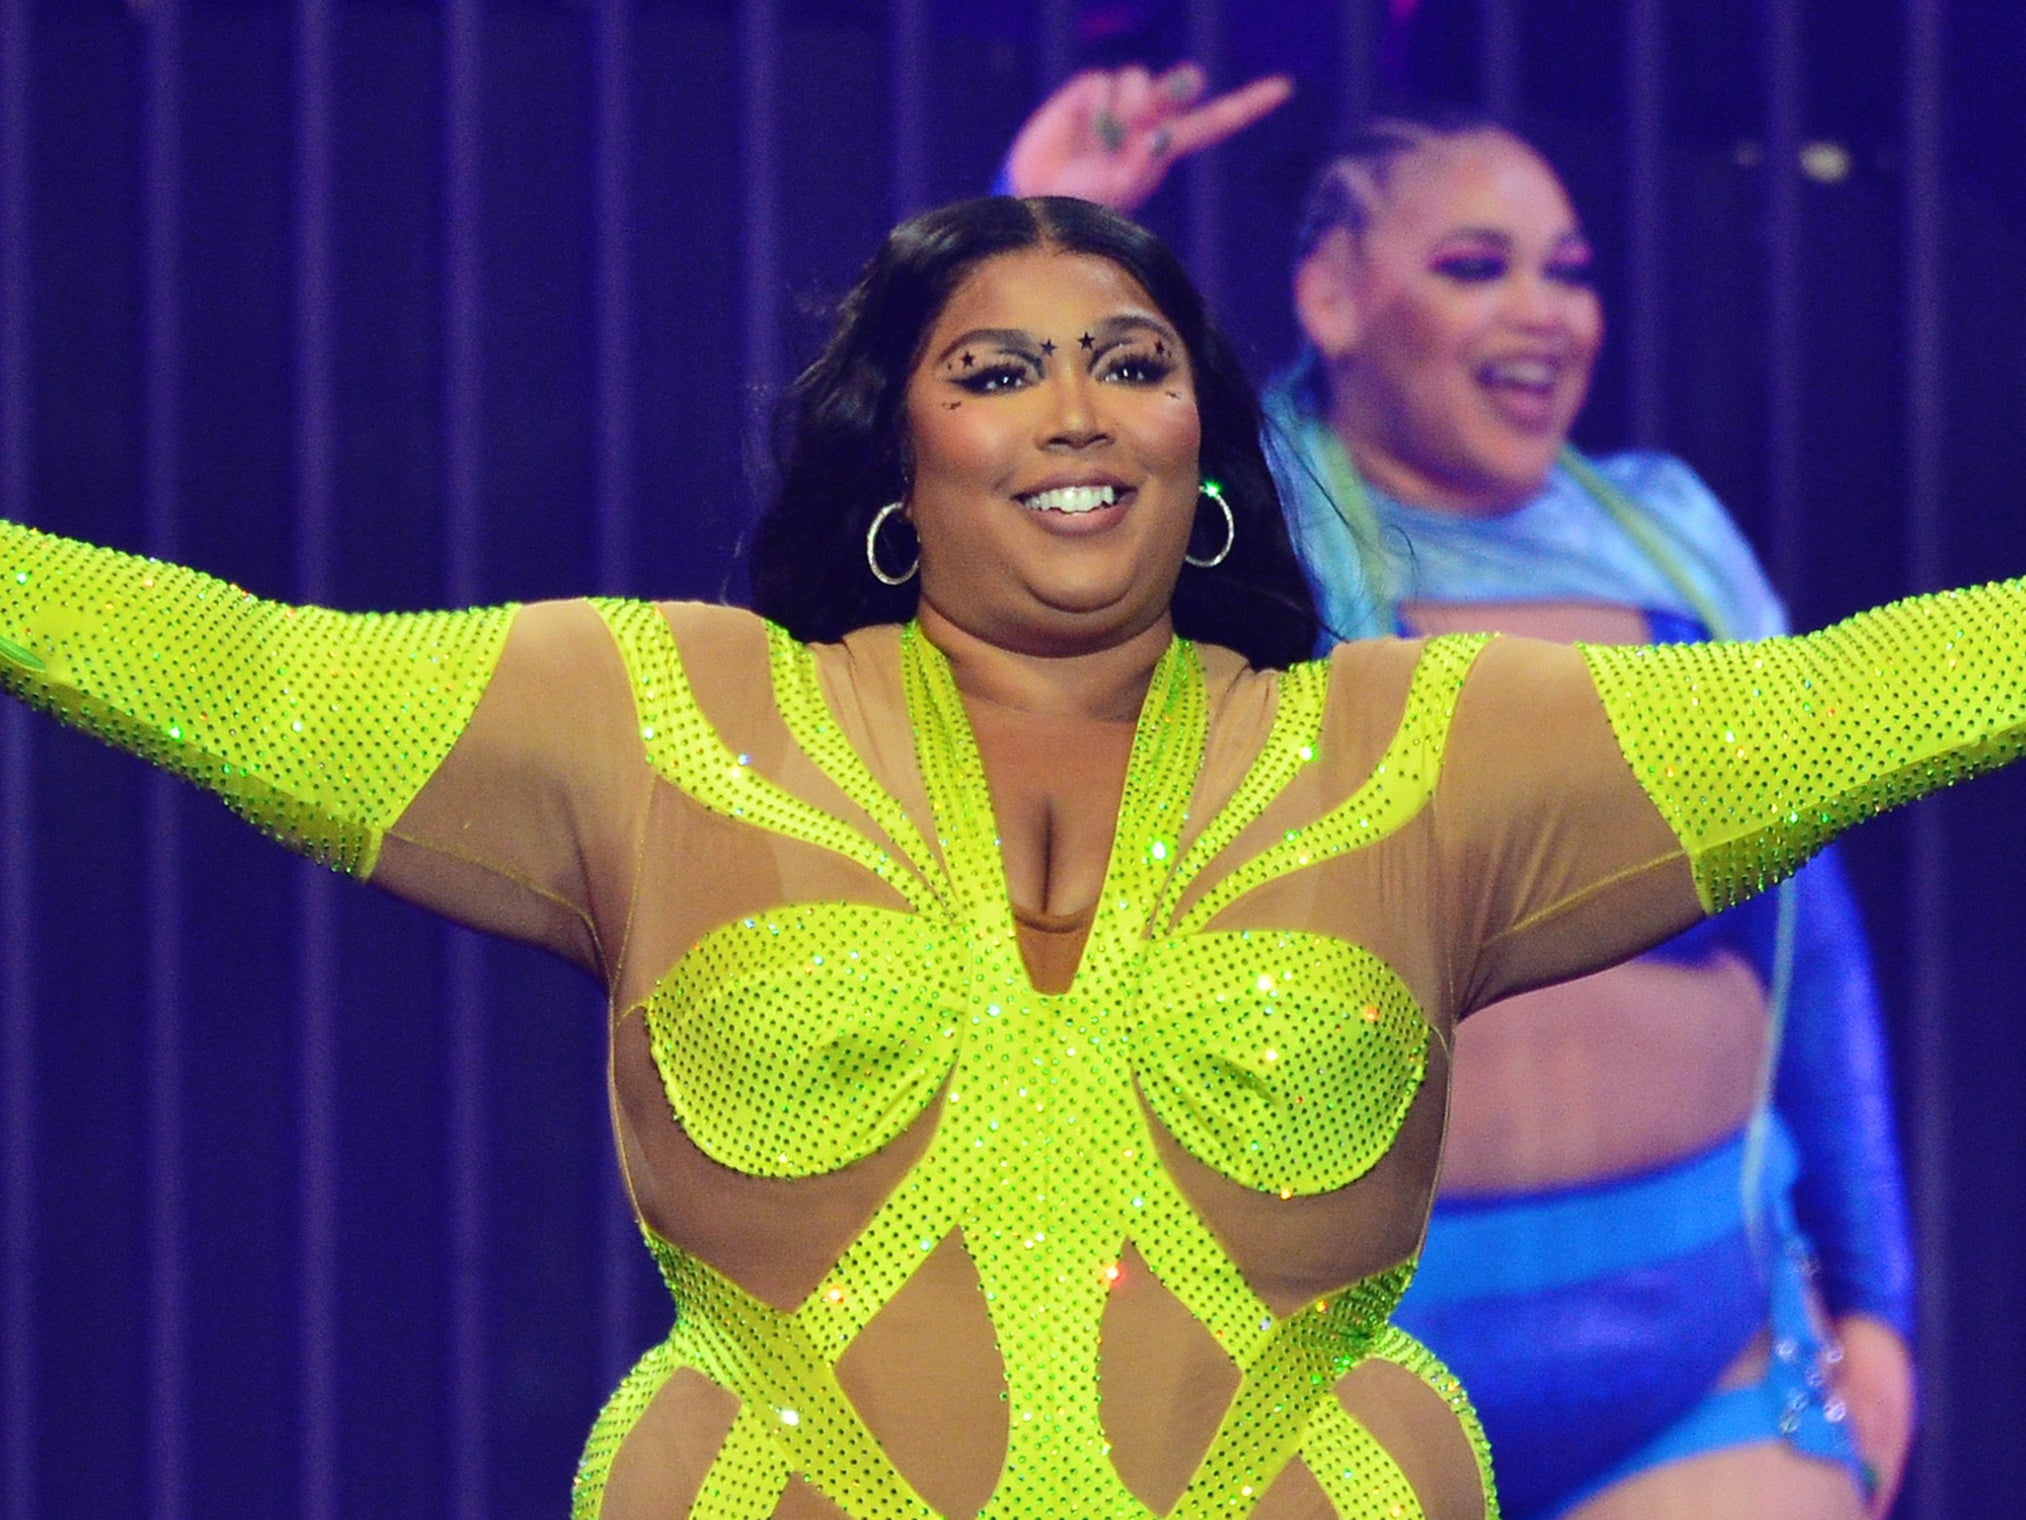 Lizzo review, O2 Arena: Pop powerhouse proves she's a musician for the ages